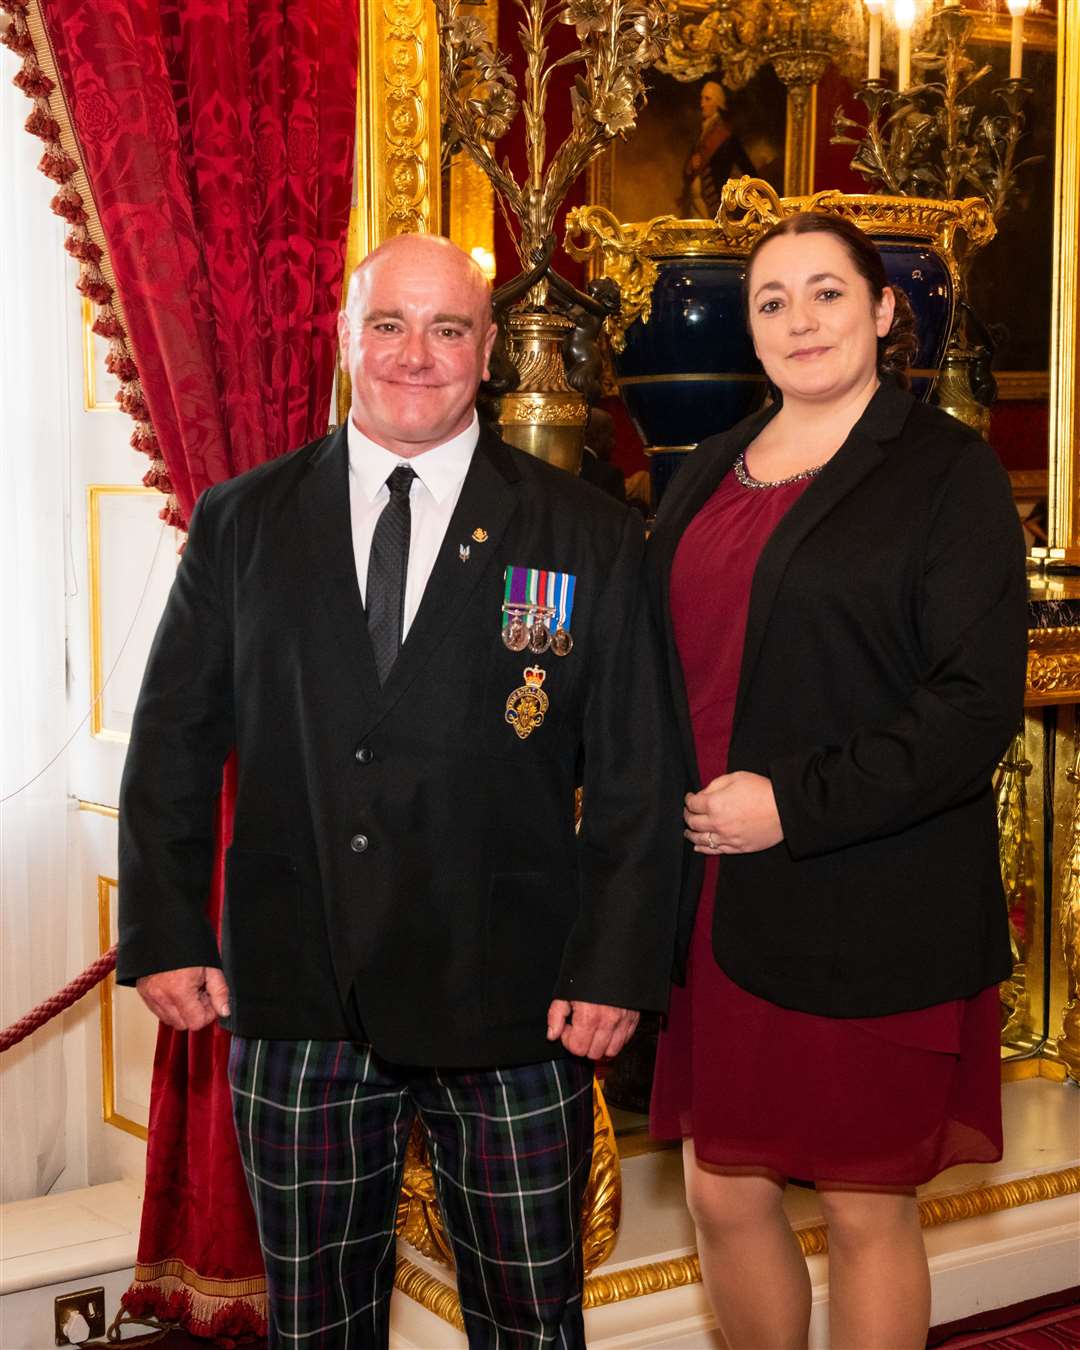 Kev Stewart and his partner Annemarie Simpson in St James's Palace.